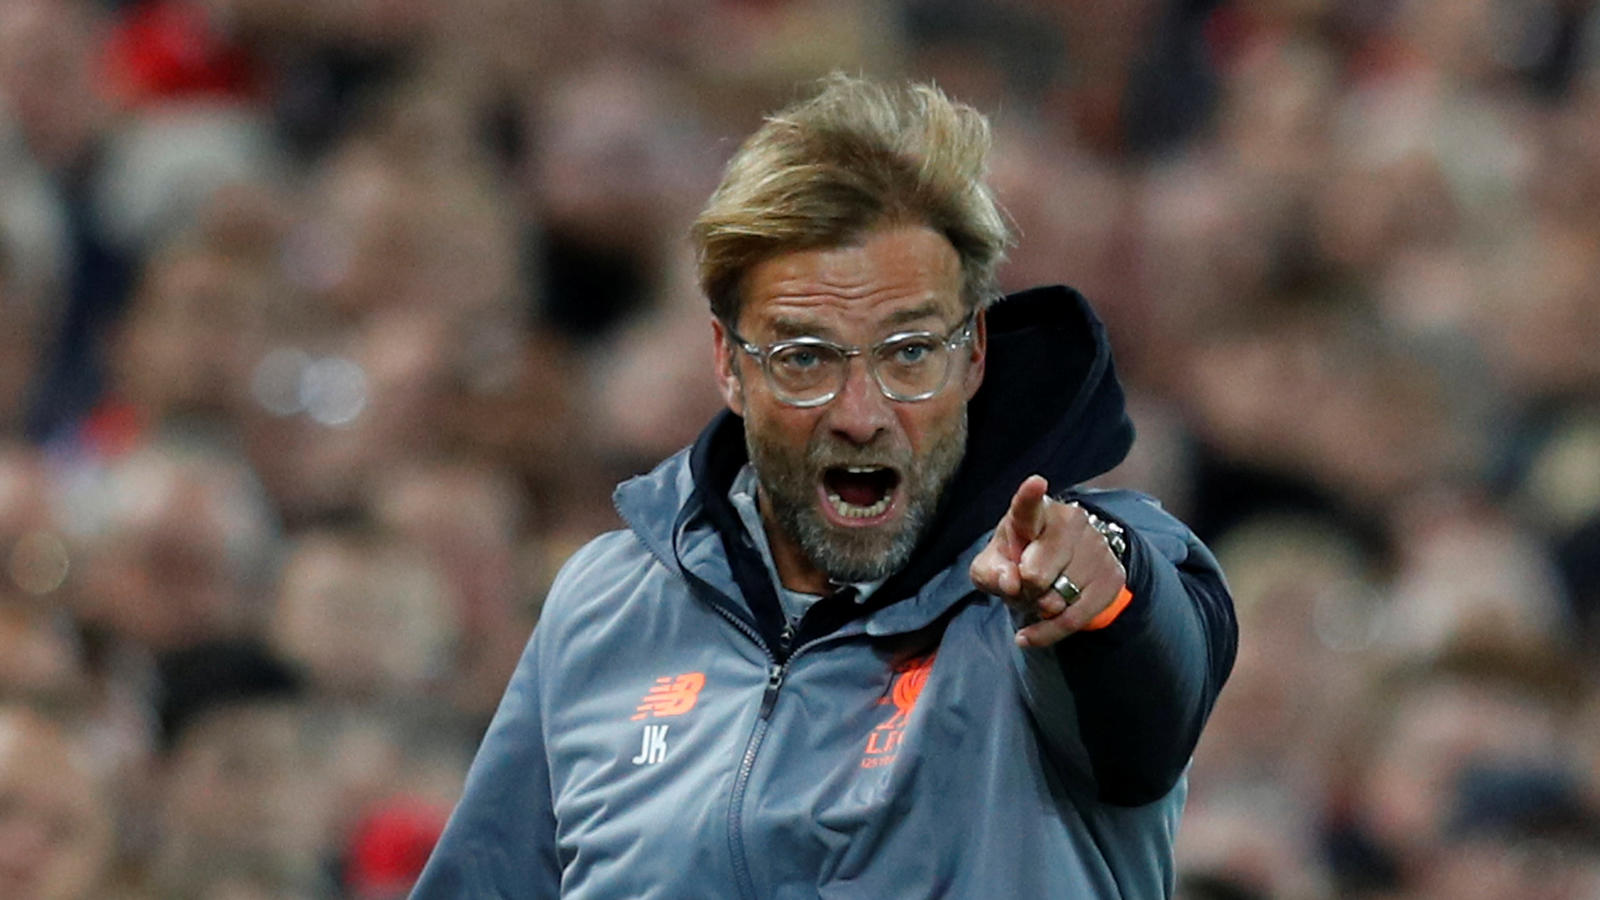 Soccer Football - Champions League - Liverpool vs Sevilla - Anfield, Liverpool, Britain - September 13, 2017   Liverpool manager Juergen Klopp gestures   REUTERS/Phil Noble